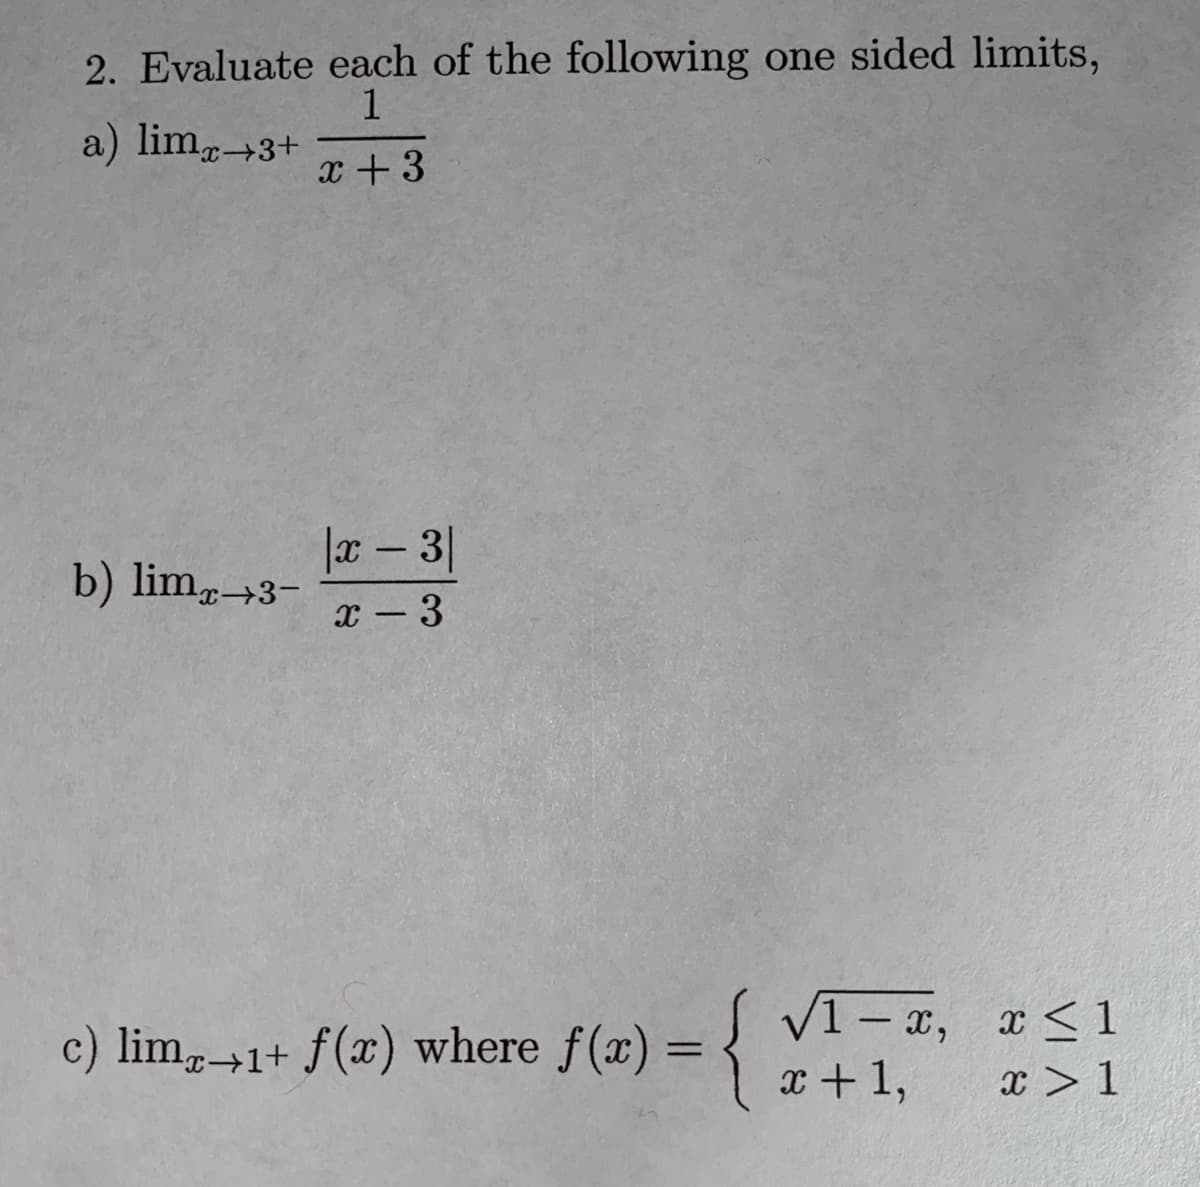 2. Evaluate each of the following one sided limits,
1
a) lim3+
x +3
x 3|
b) lim→3-
-
x - 3
c) lim,→1+ f(x) V1 – x, x<1
where f(x) = {
V1 – x, x < 1
x + 1,
x > 1
